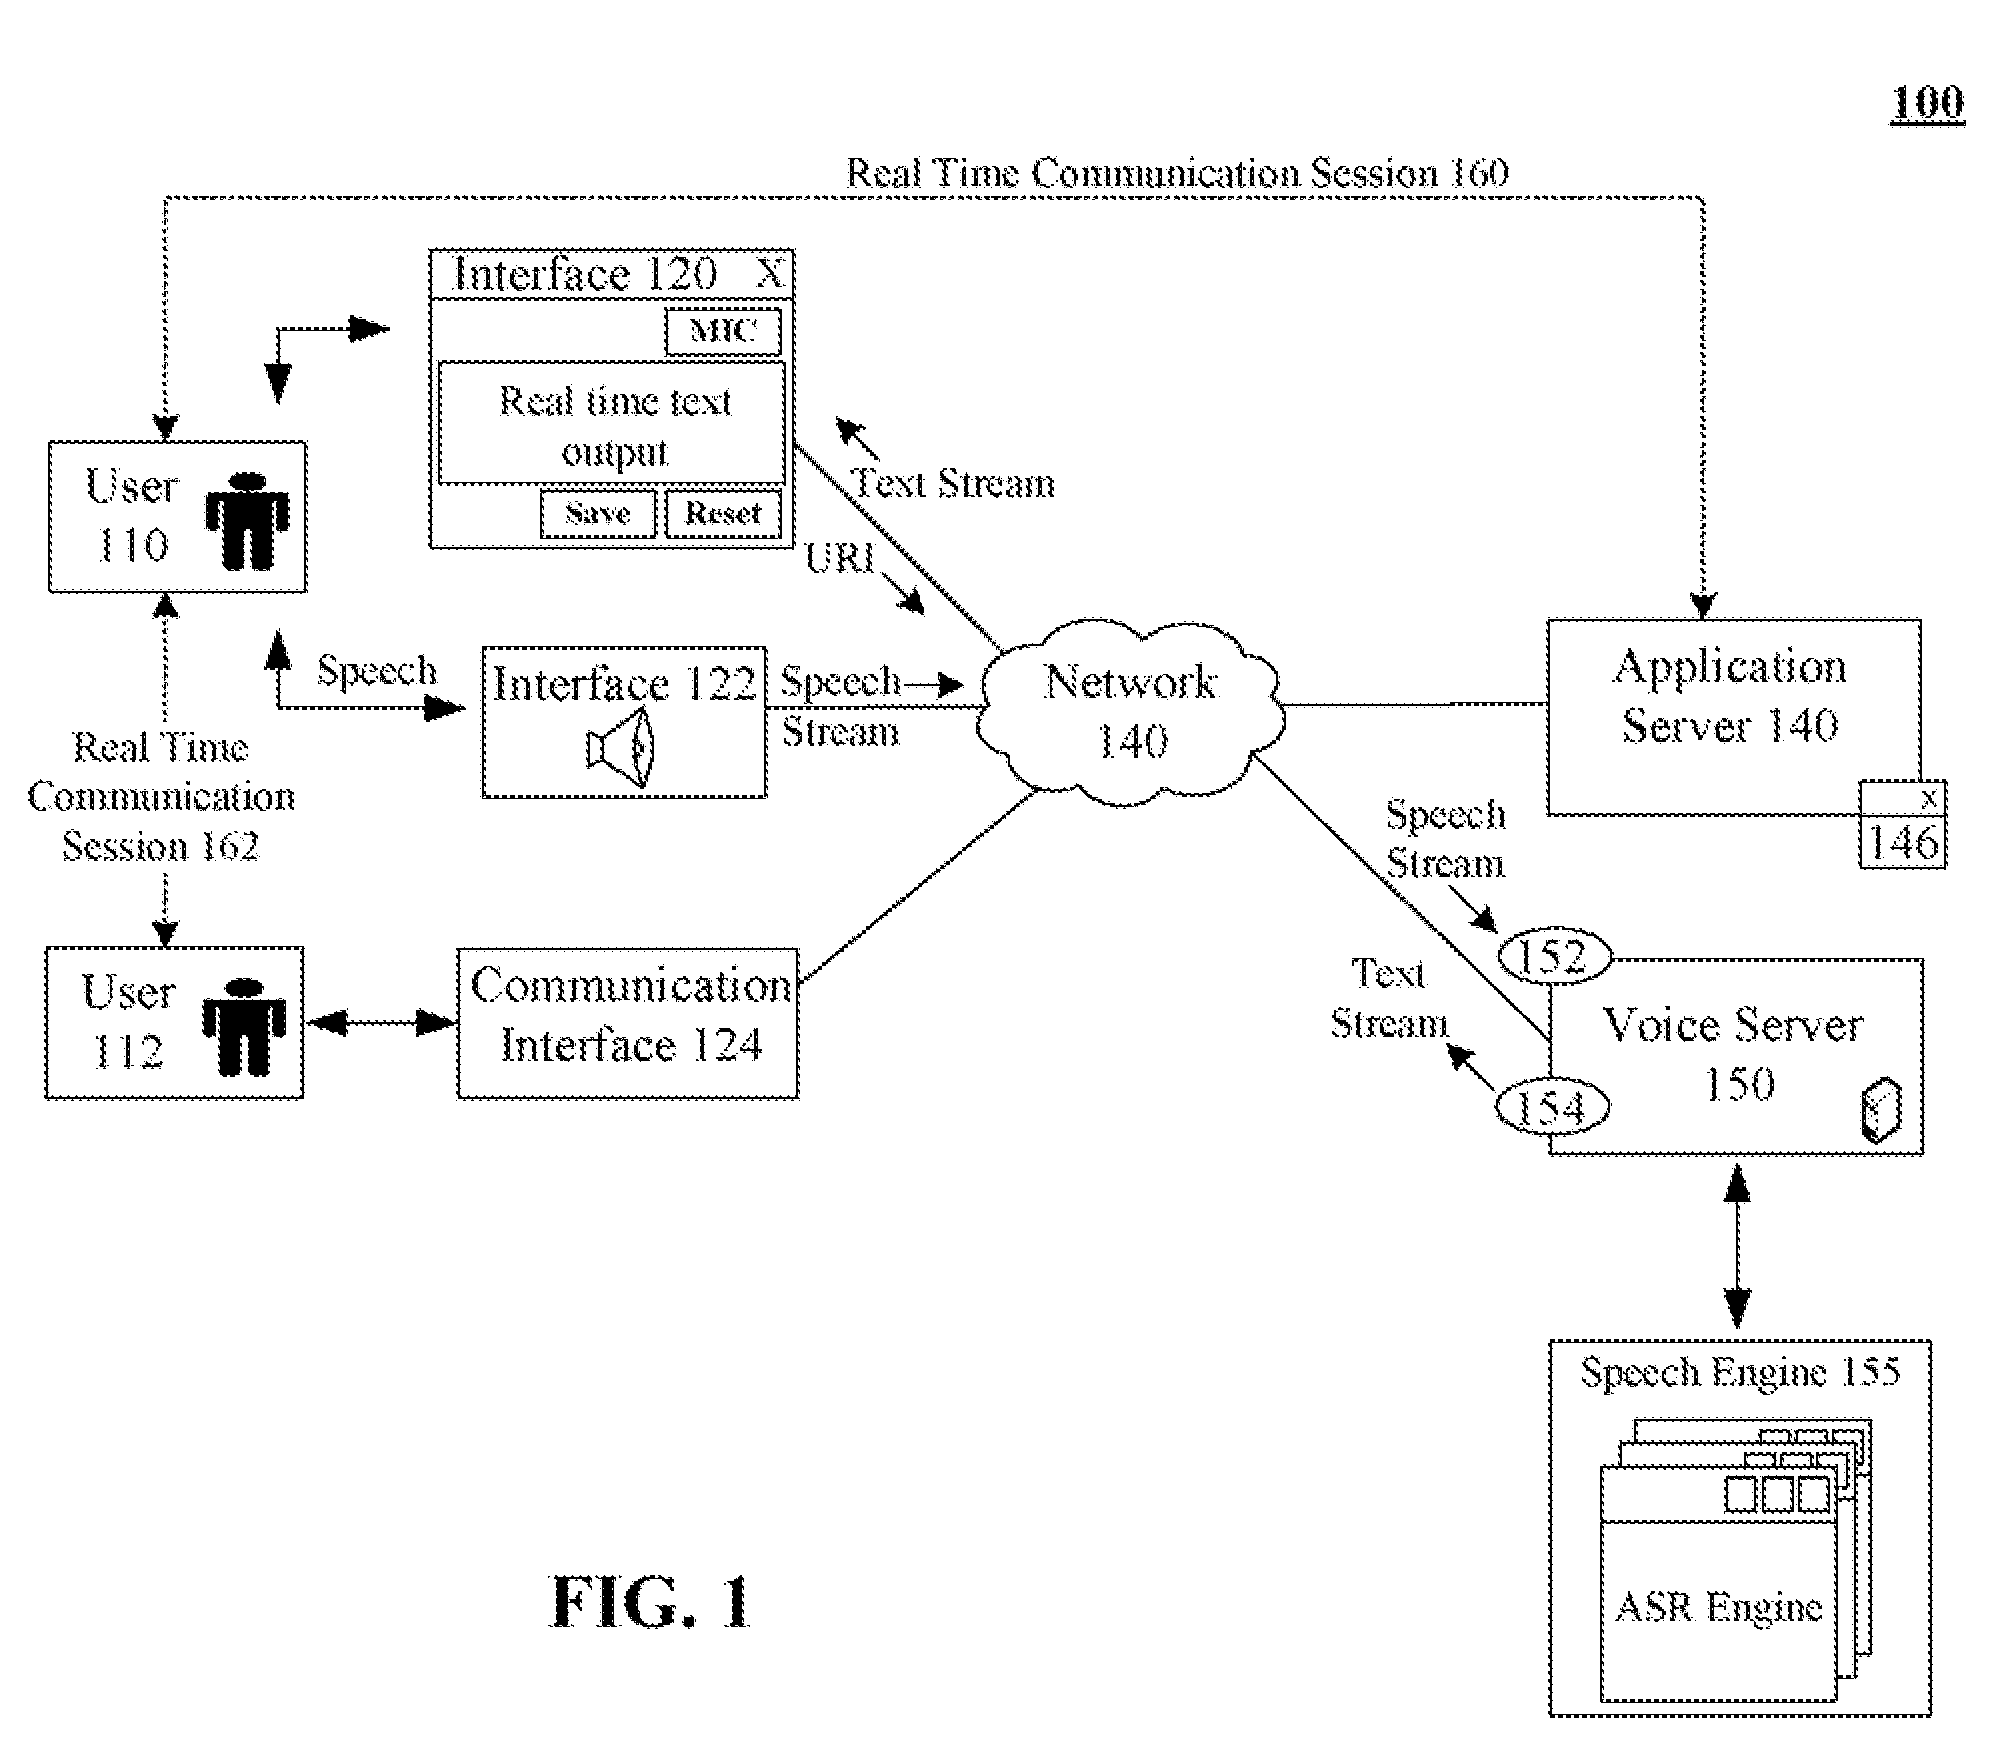 Adding real-time dictation capabilities for speech processing operations handled by a networked speech processing system